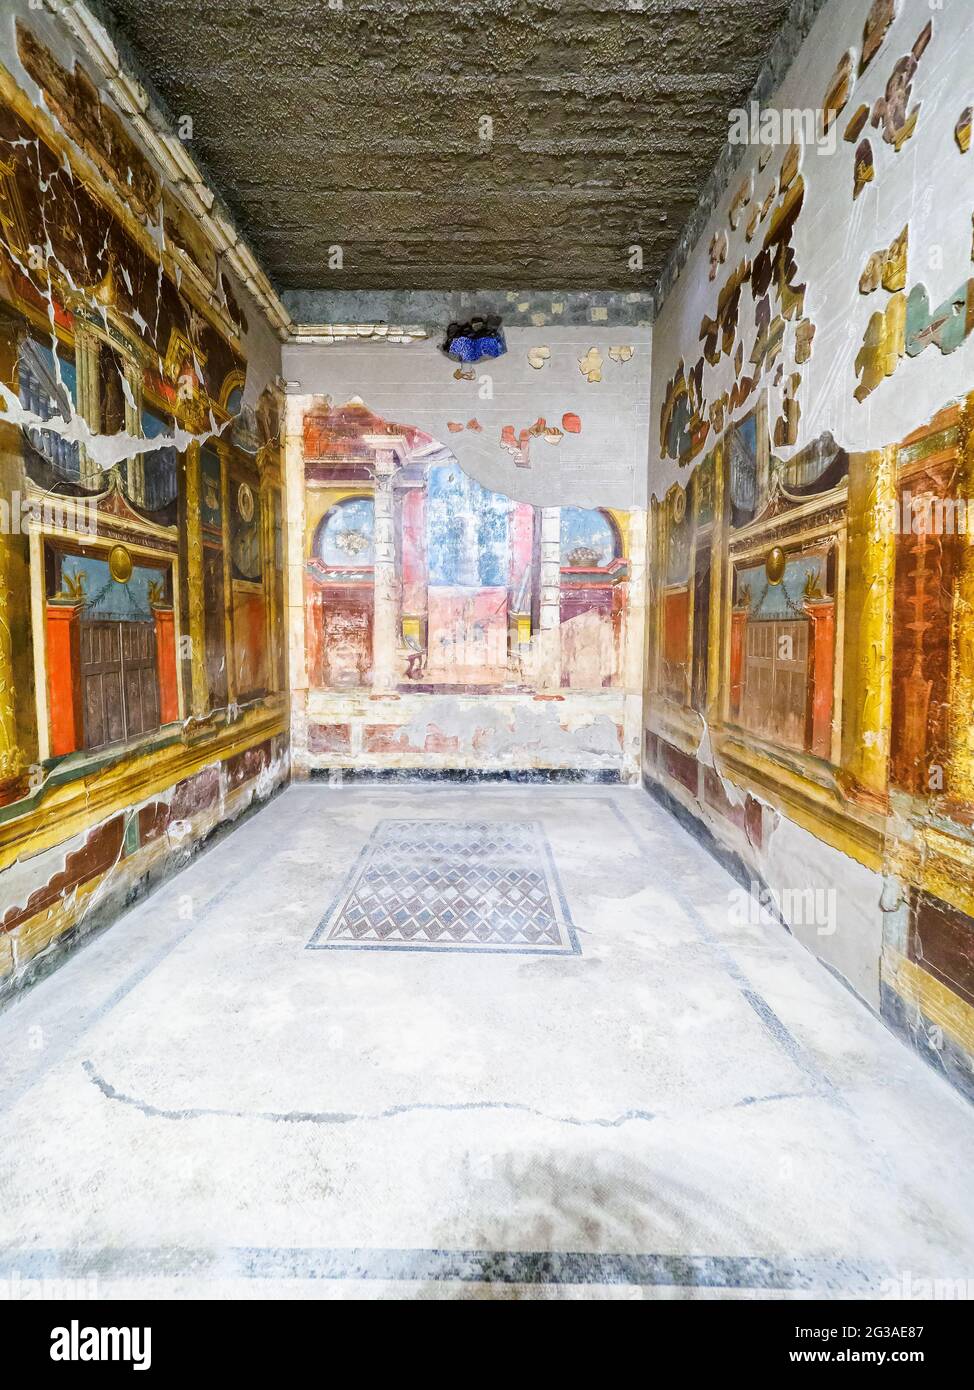 Triclinium (dining room) with vibrant colours of the second style frescoes which decorate the walls - Oplontis known as Villa Poppaea in Torre Annunziata - Naples, Italy Stock Photo